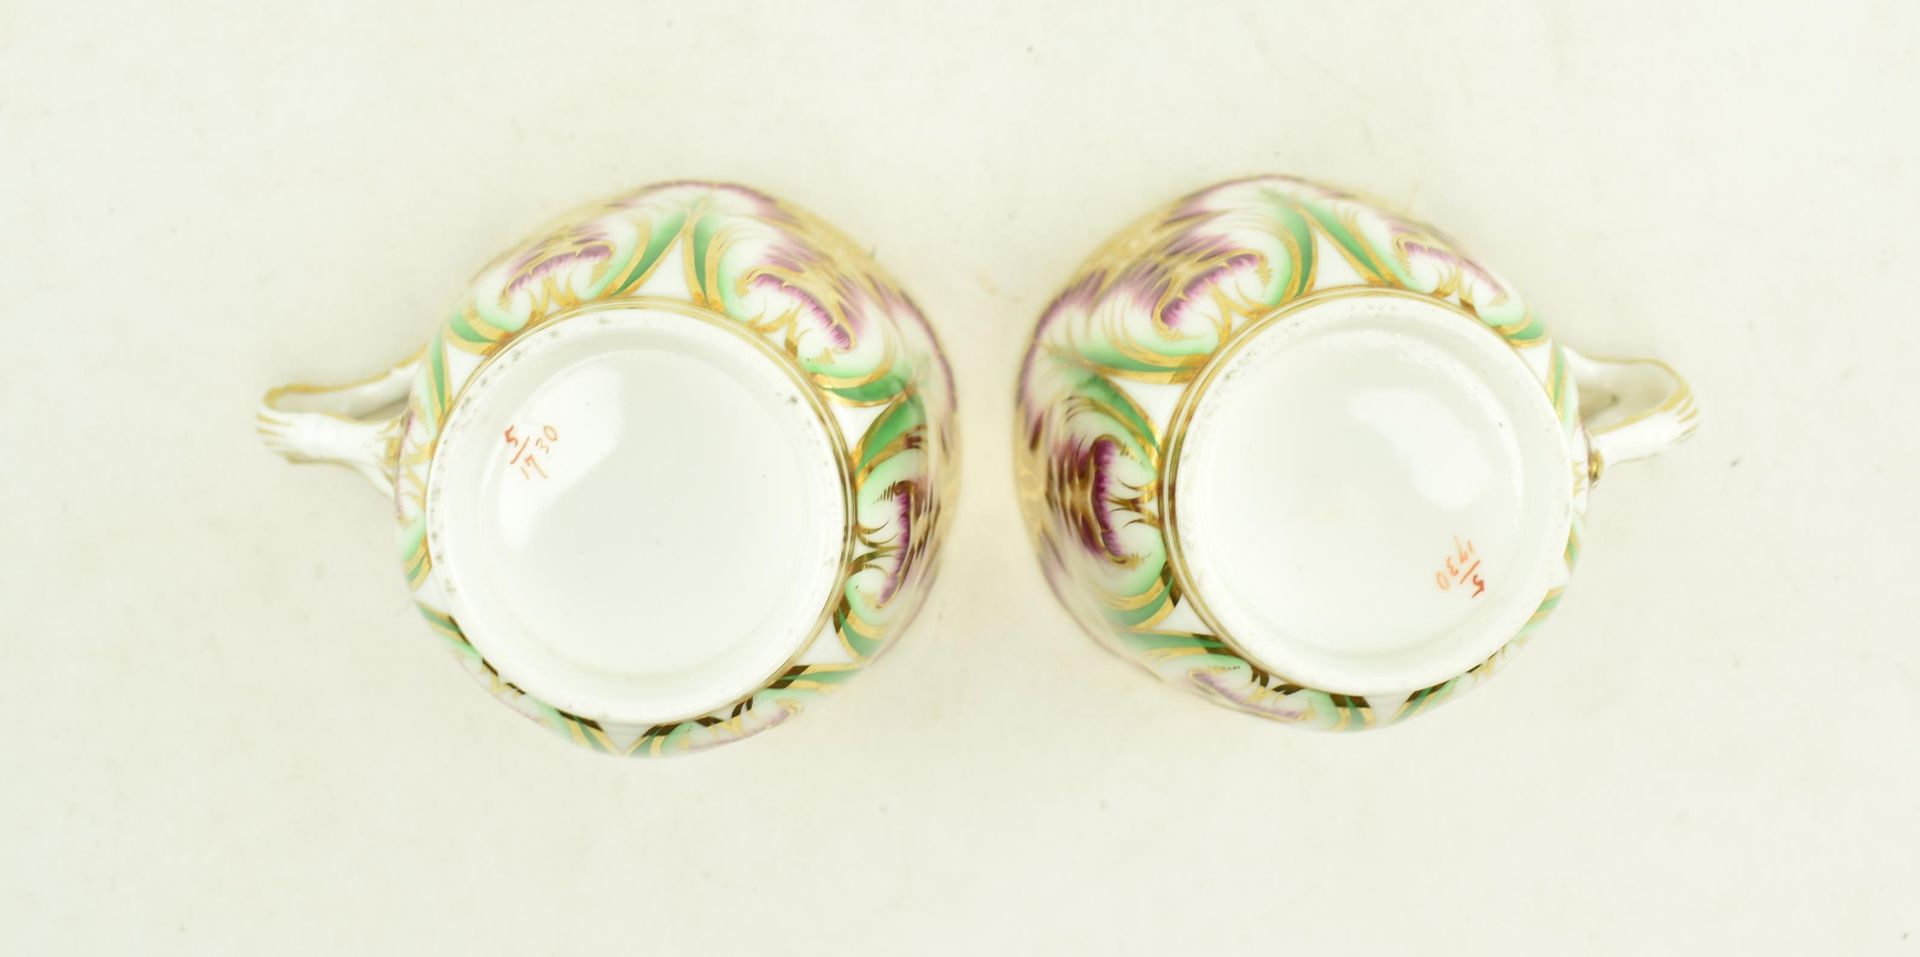 TWO MID 19TH CENTURY RIDGWAY PORCELAIN TEA CUPS WITH HANDLE - Image 4 of 4